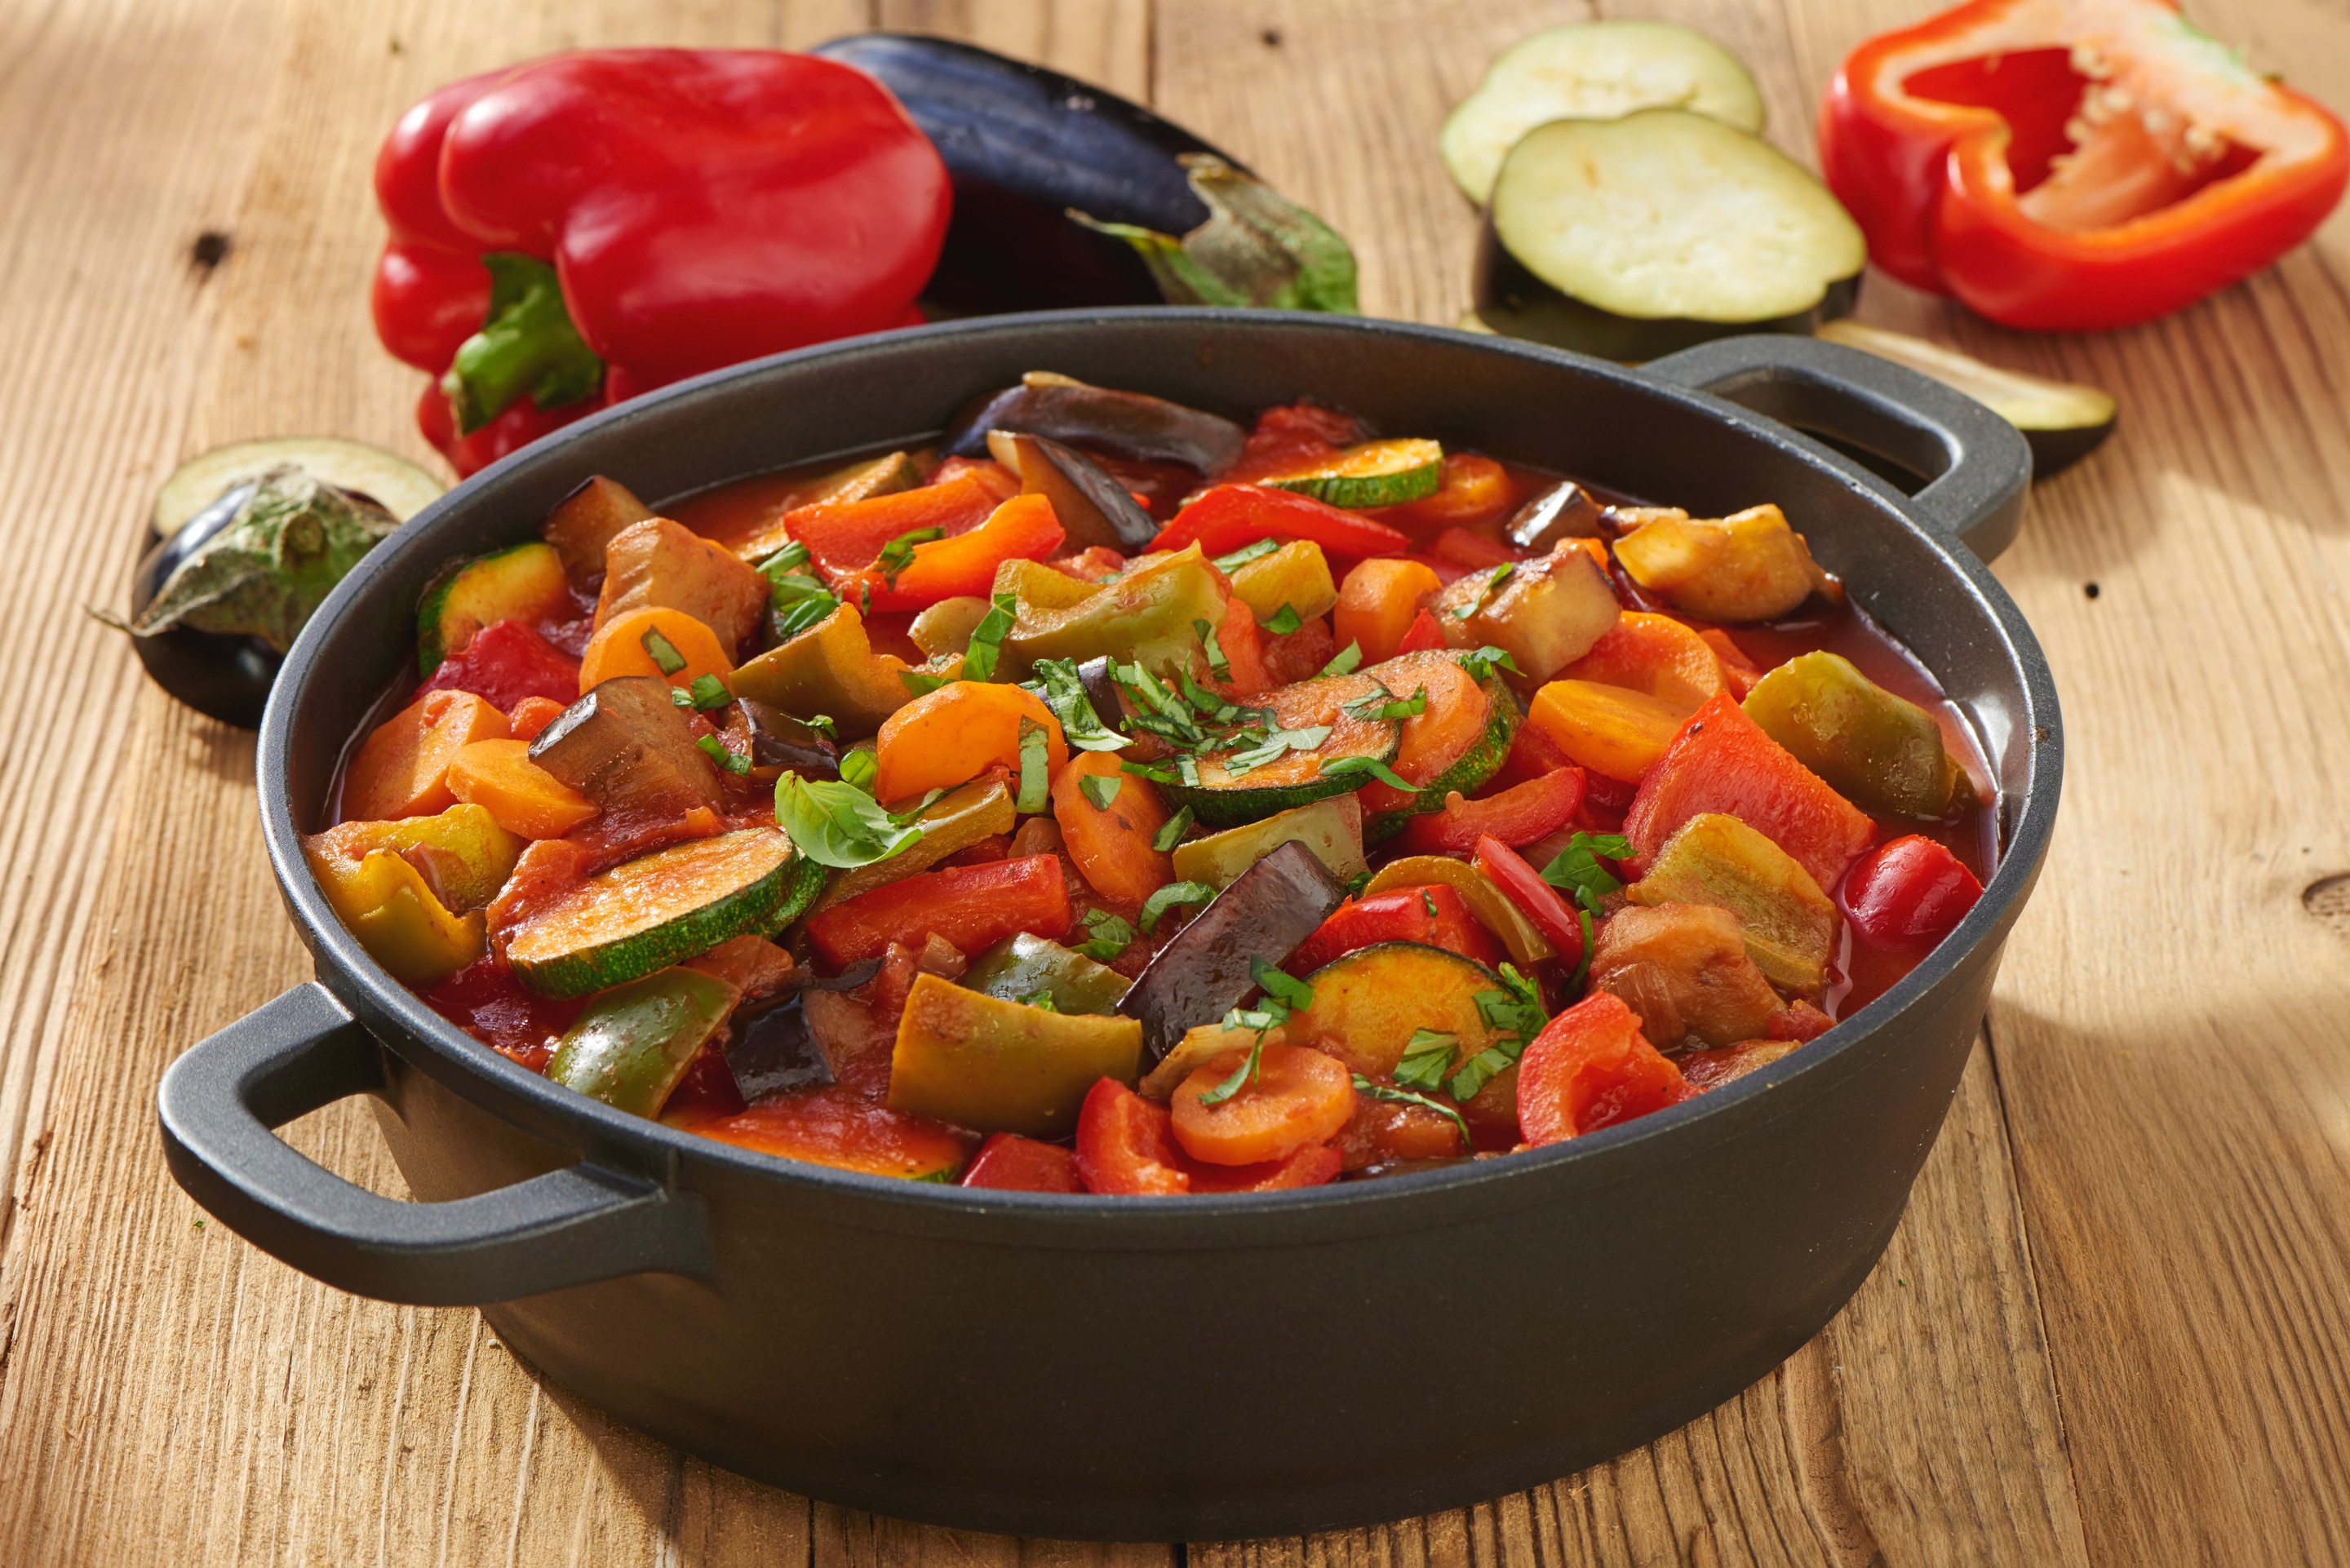 A close shot of colorful ratatouille served in casserole kept on wooden table. Red capsicum and brinjal kept next to casserole.